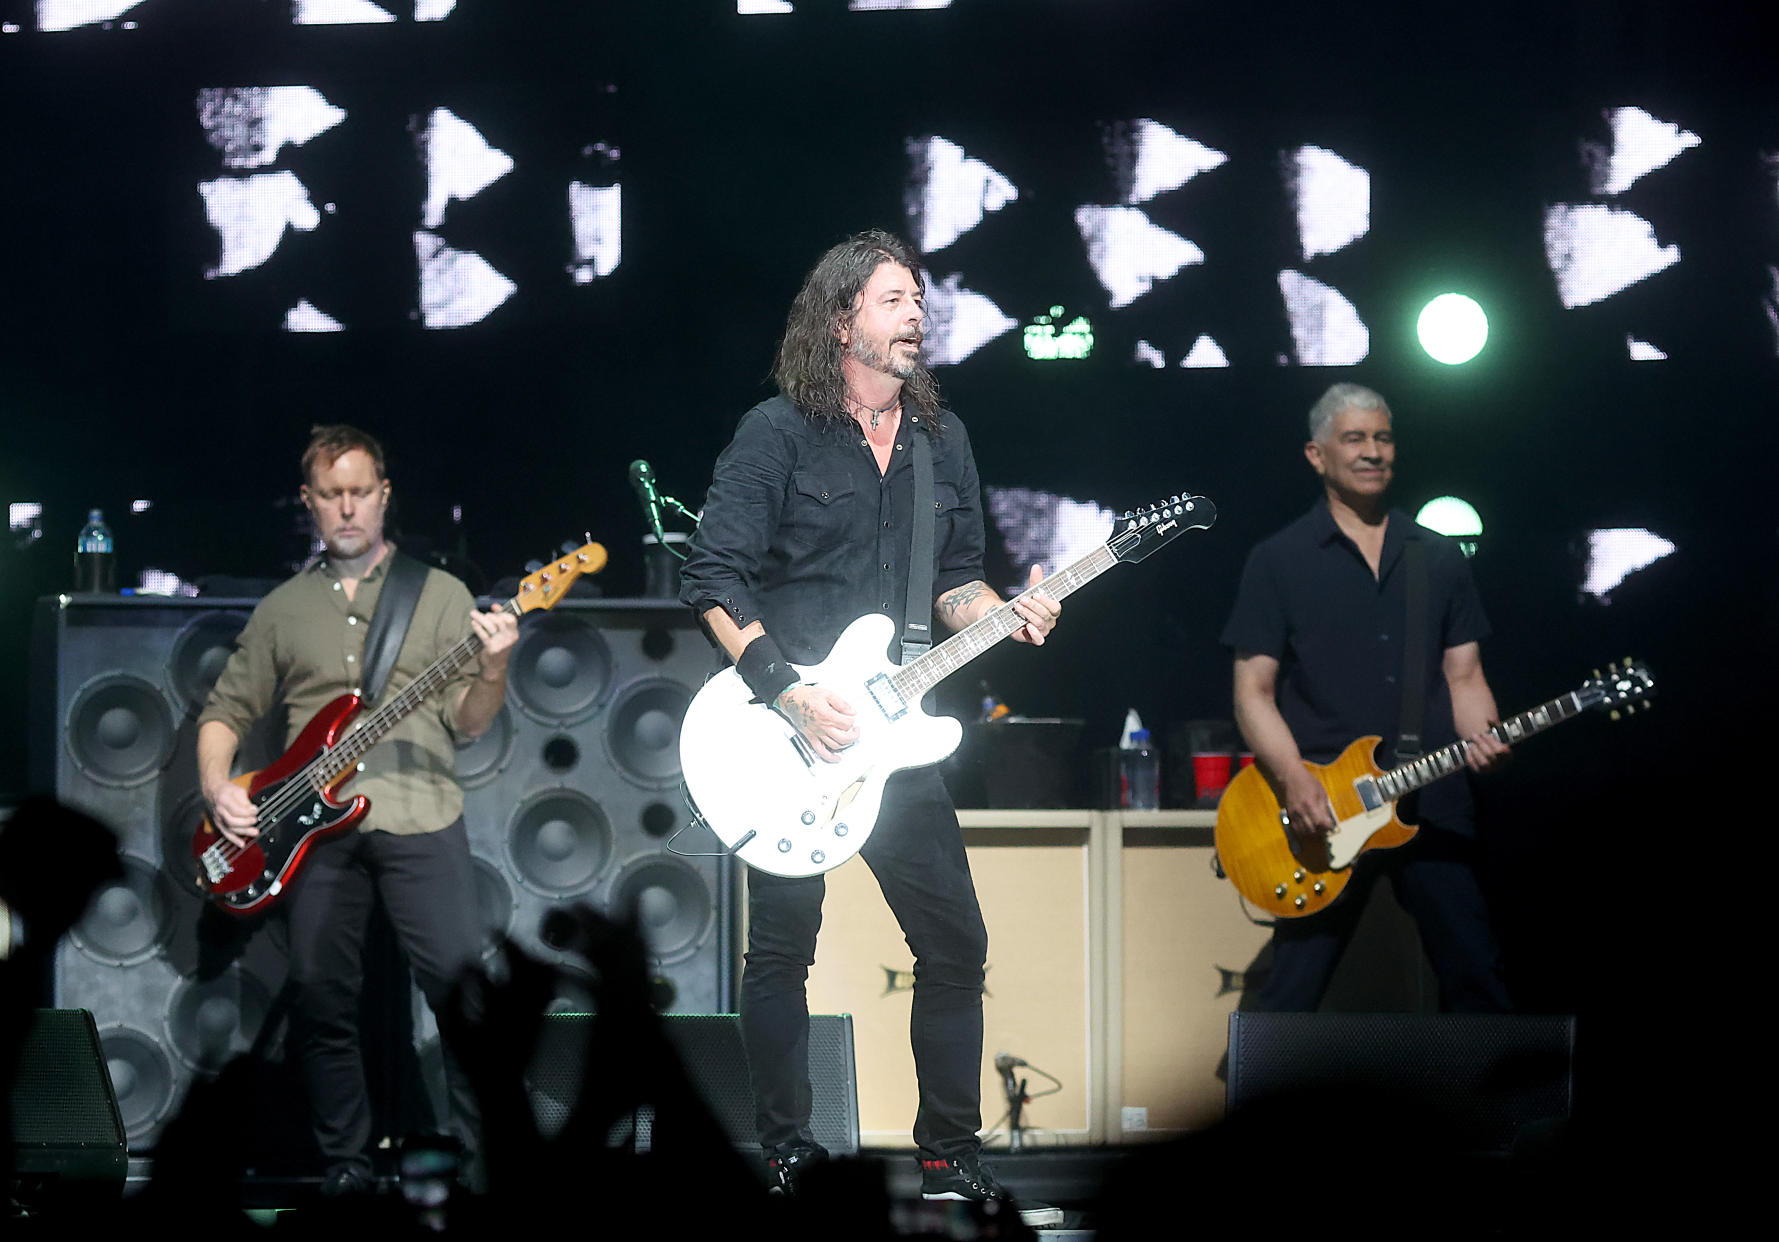 MANCHESTER, TENNESSEE - JUNE 18: (L - R) Nate Mendel, Dave Grohl and Pat Smear of Foo Fighters perform in concert during Bonnaroo Music & Arts Festival on June 18, 2023 in Manchester, Tennessee. (Photo by Gary Miller/WireImage)